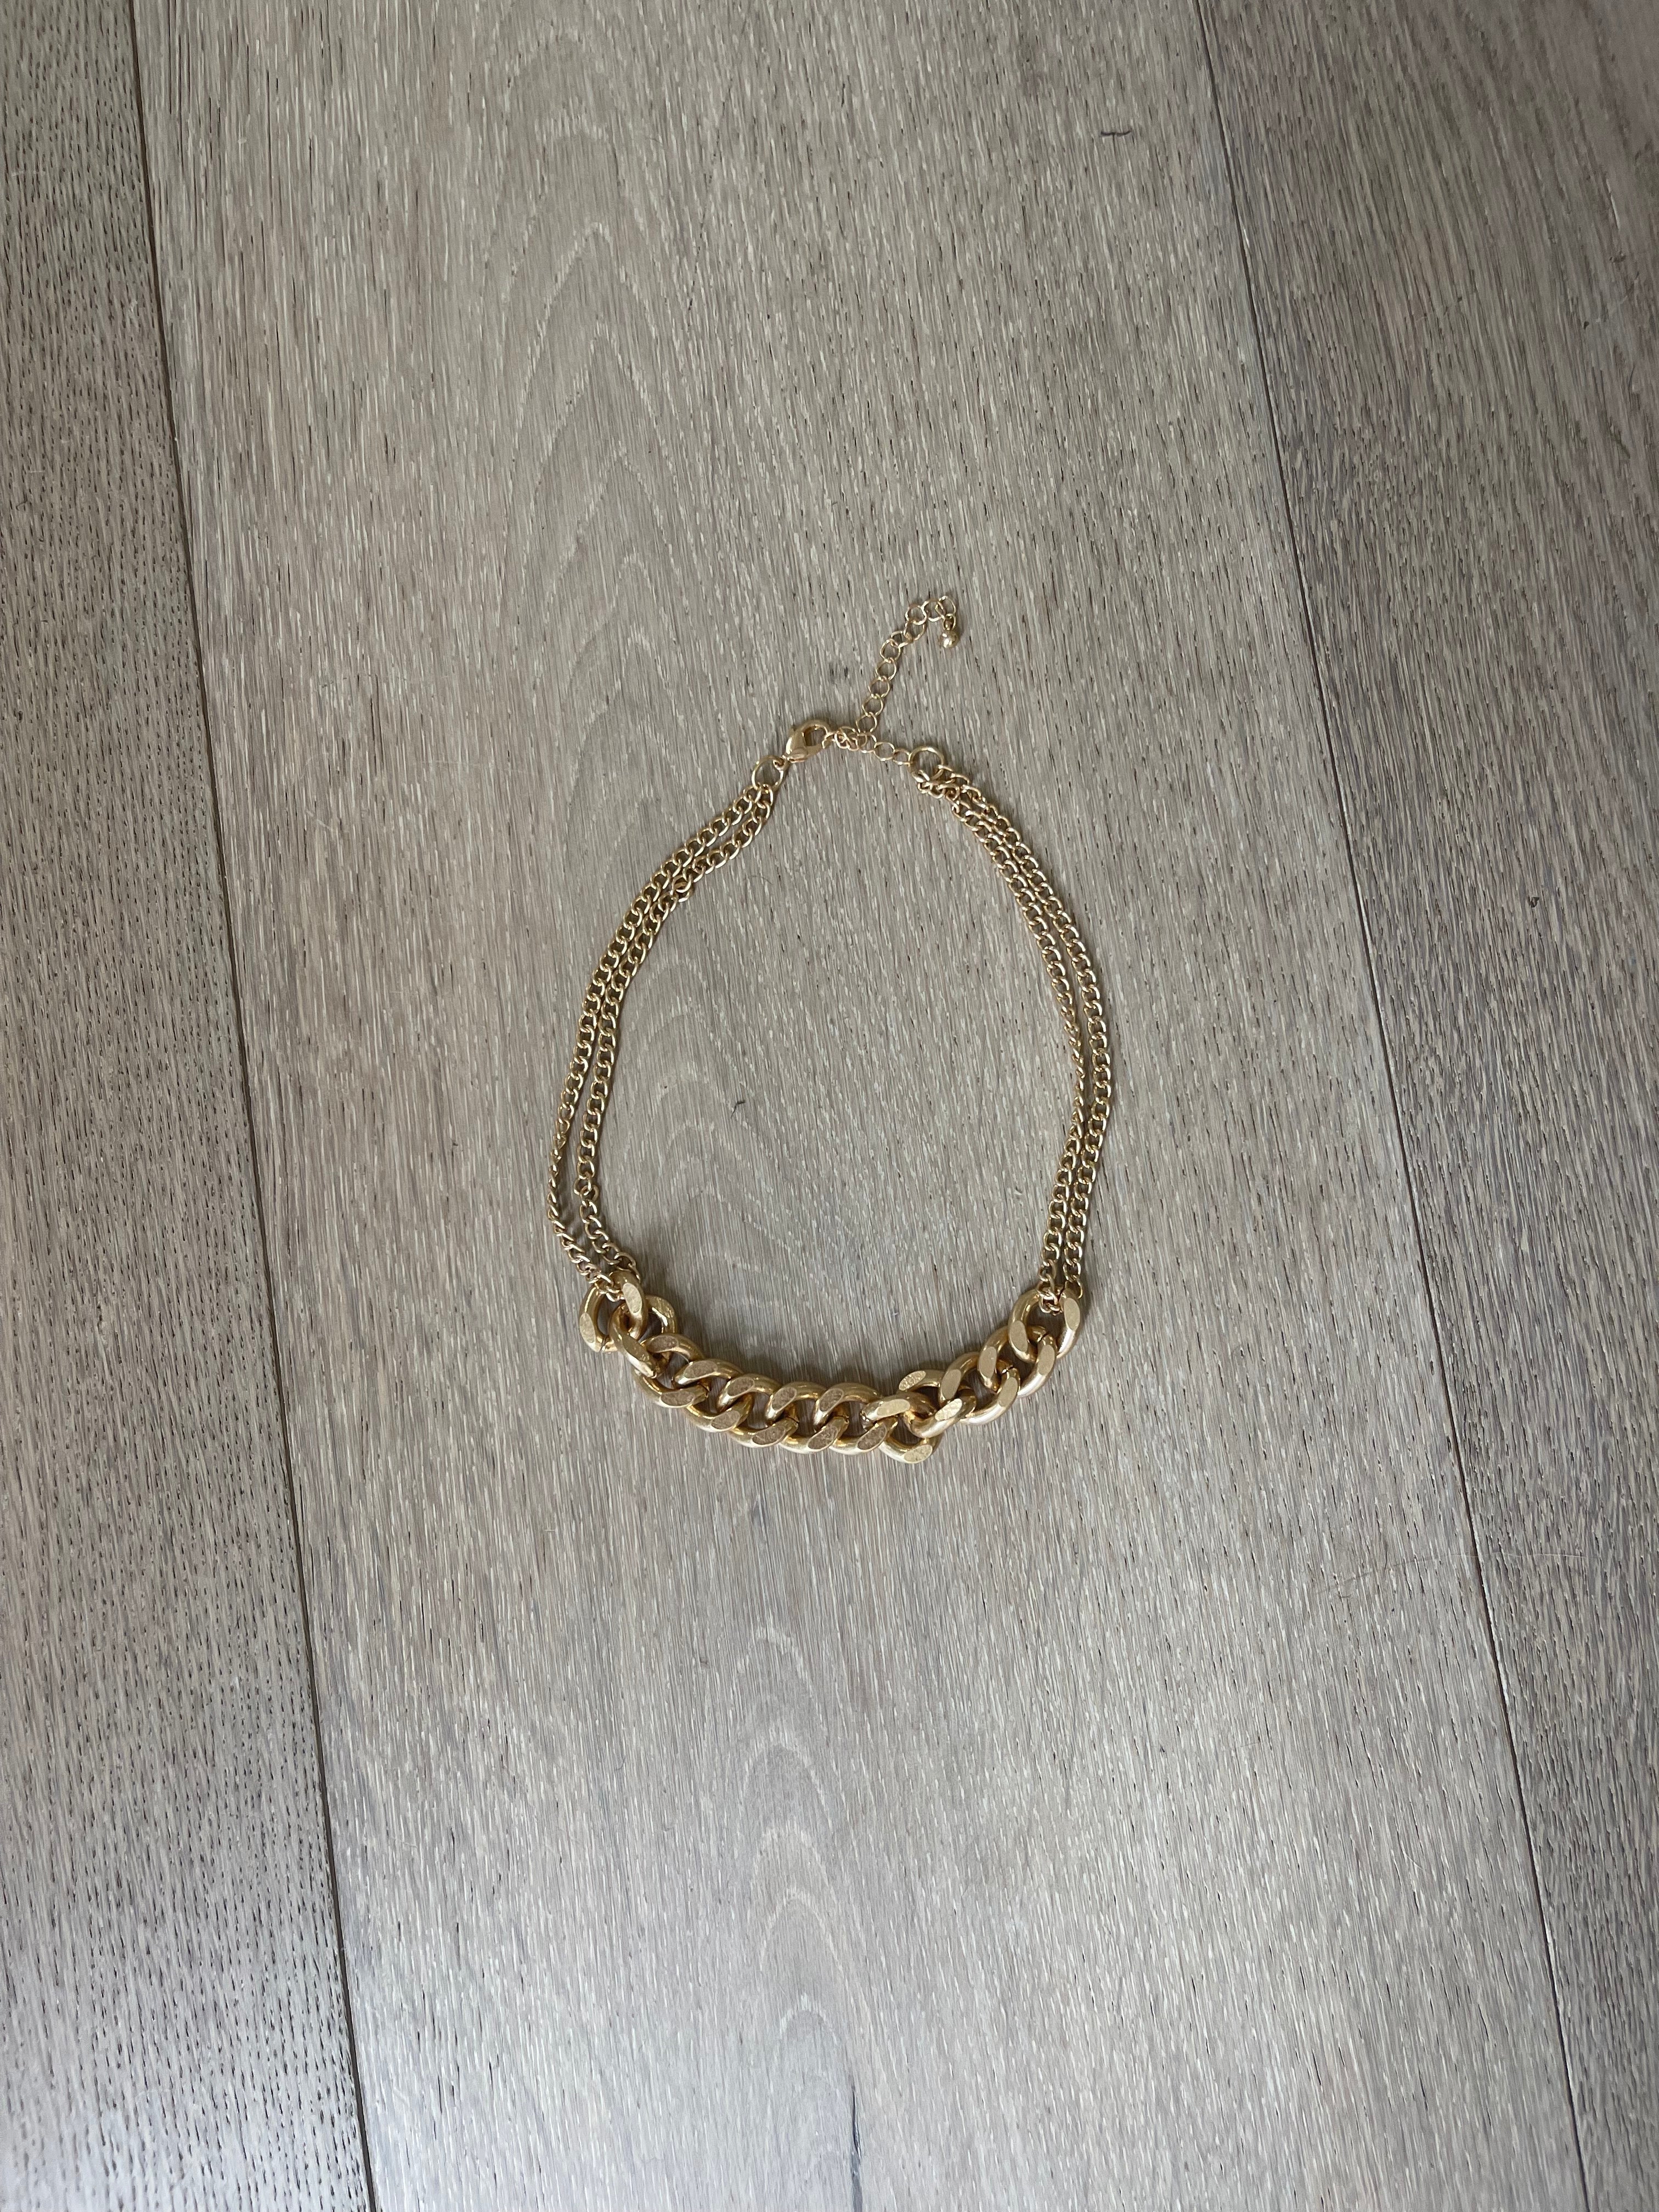 Gold Statement Chain Necklace